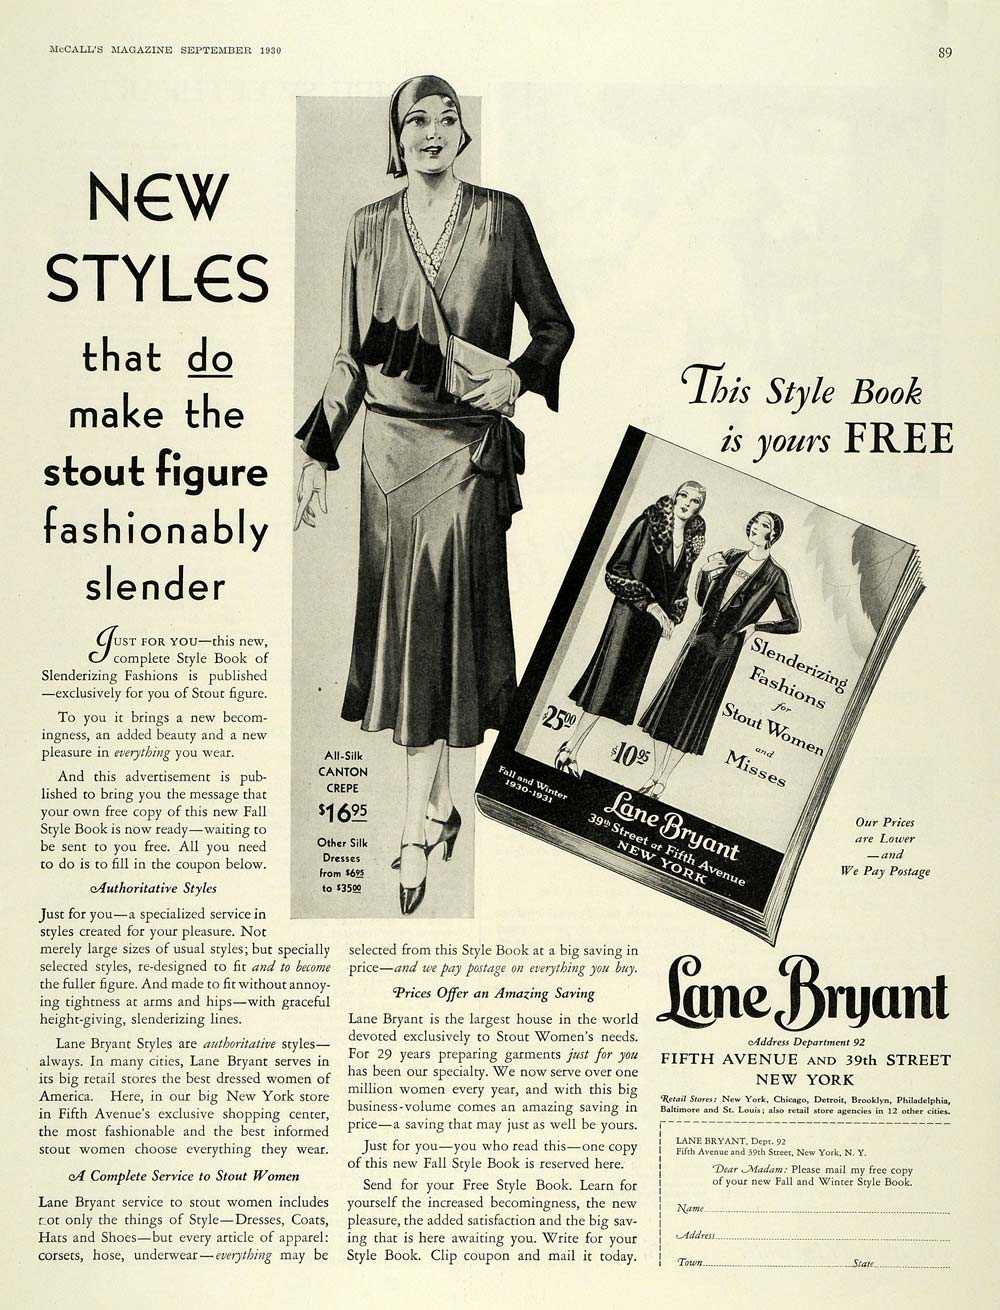 What Was Women's Fashion Like In the 1930s?